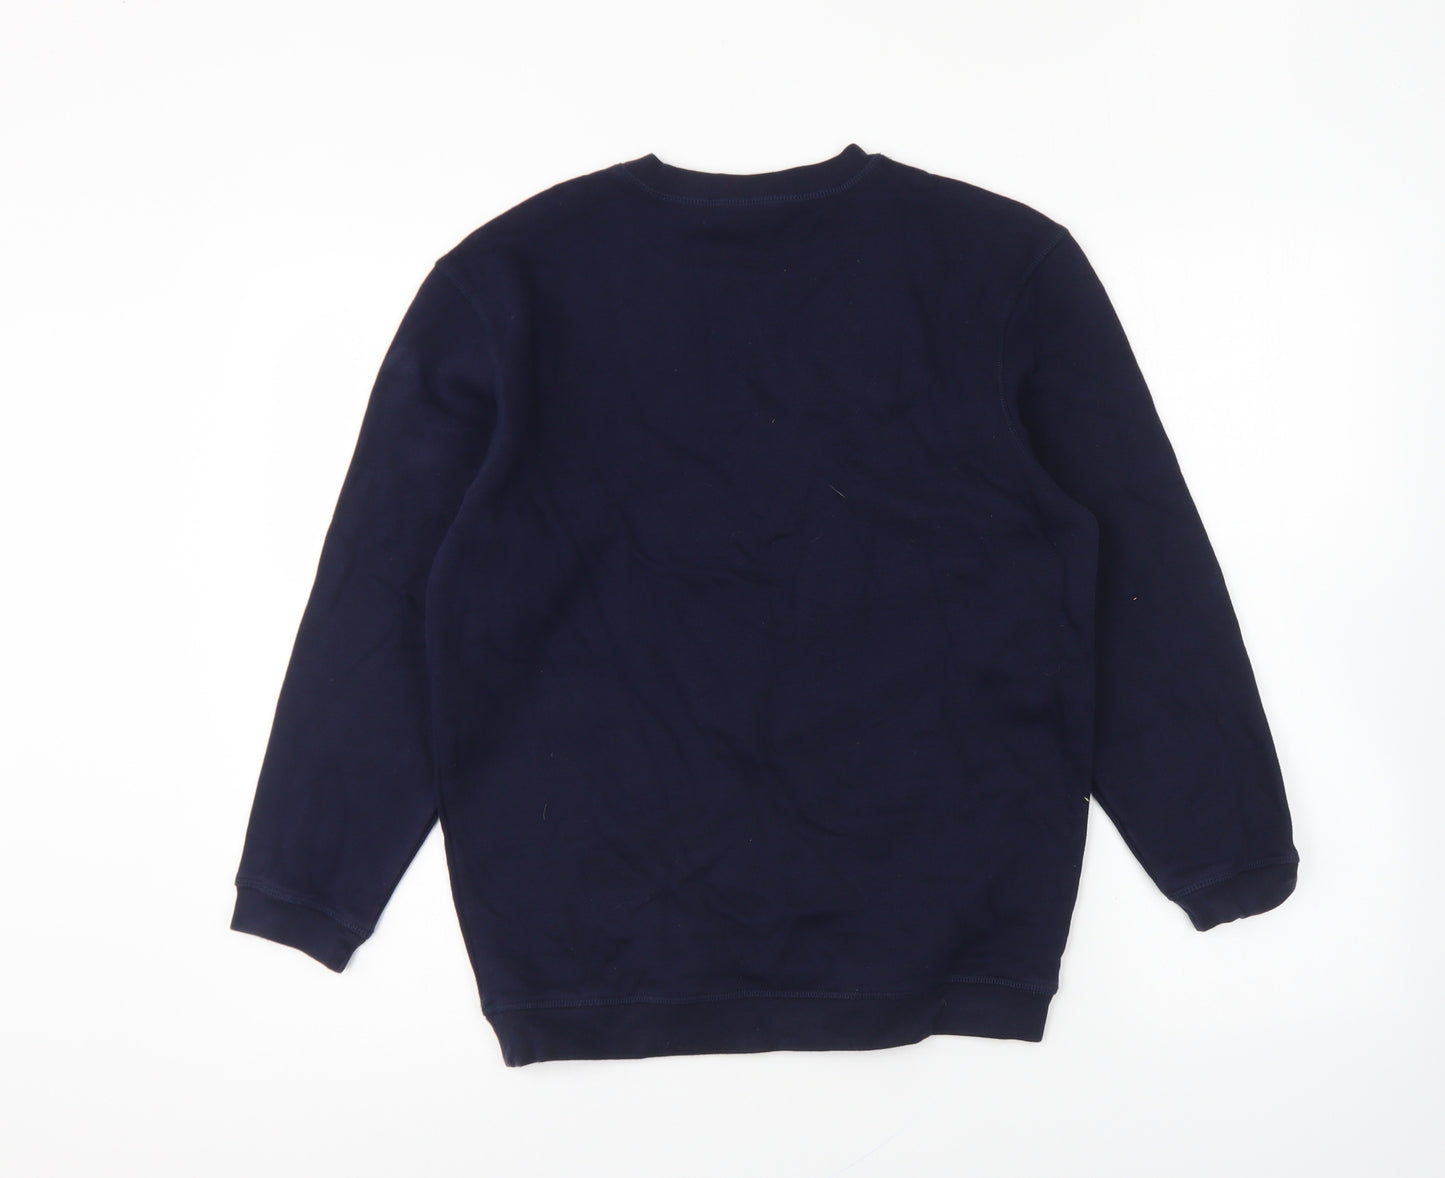 Back To Scool Boys Blue Cotton Pullover Sweatshirt Size 12-13 Years Pullover